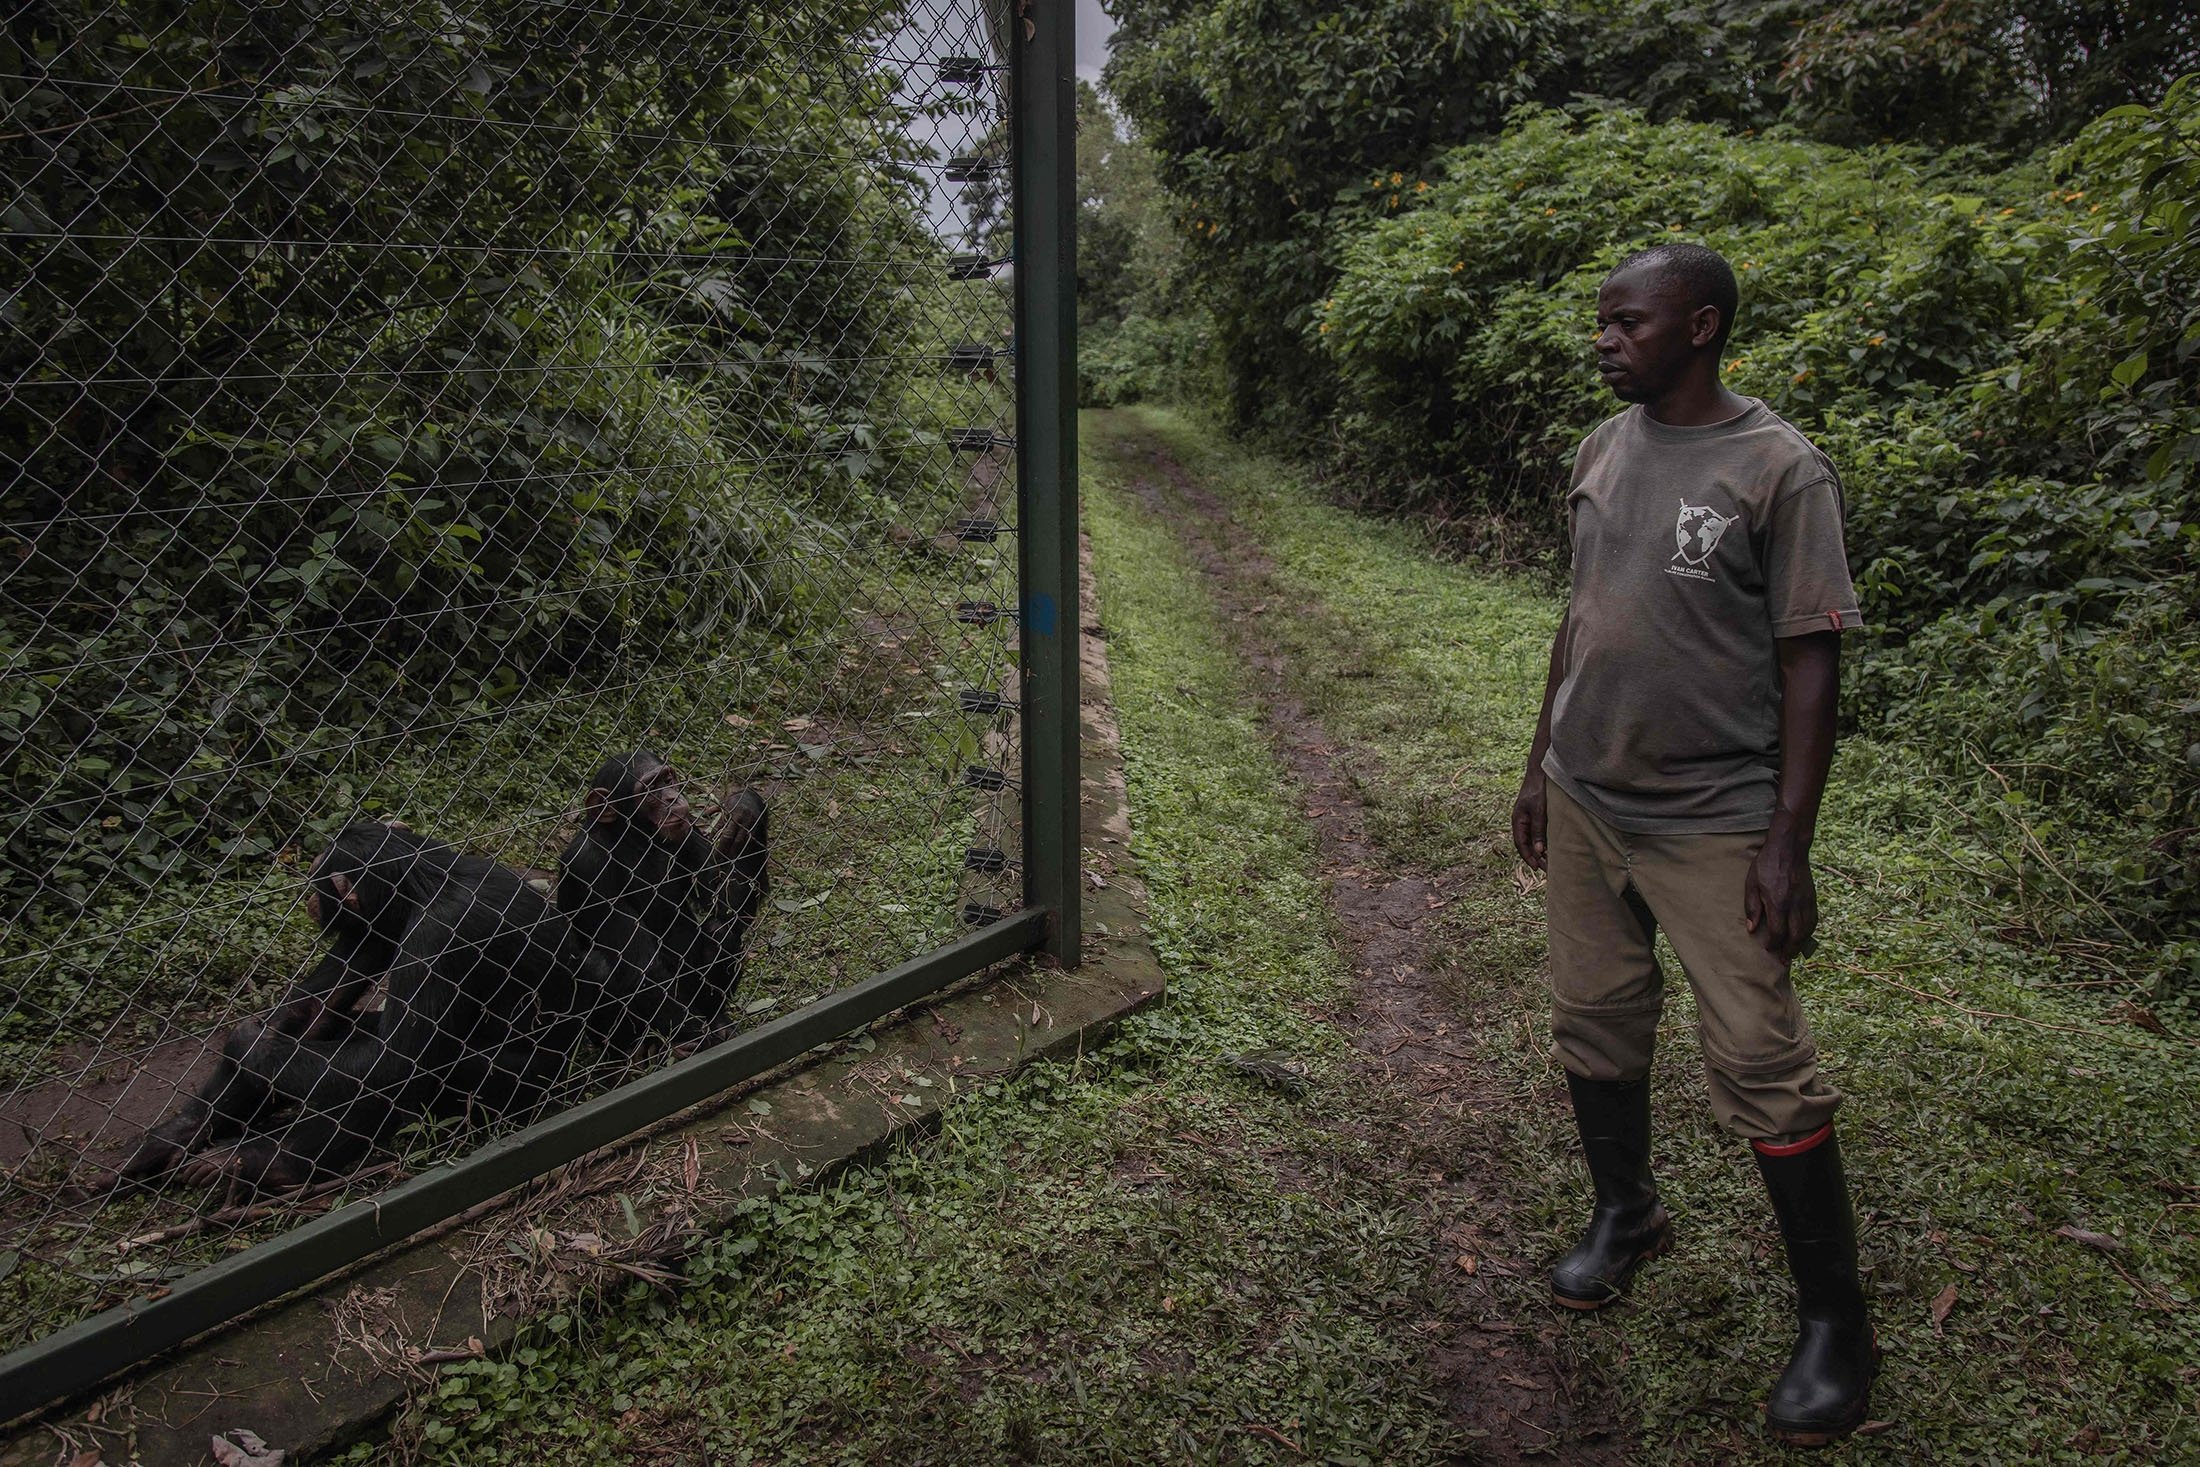 Pascal Bashinega stands next to chimpanzees at the Lwiro Primate Rehabilitation Center, in Lwiro, eastern Democratic Republic of Congo, Feb. 14, 2022. (AFP Photo)